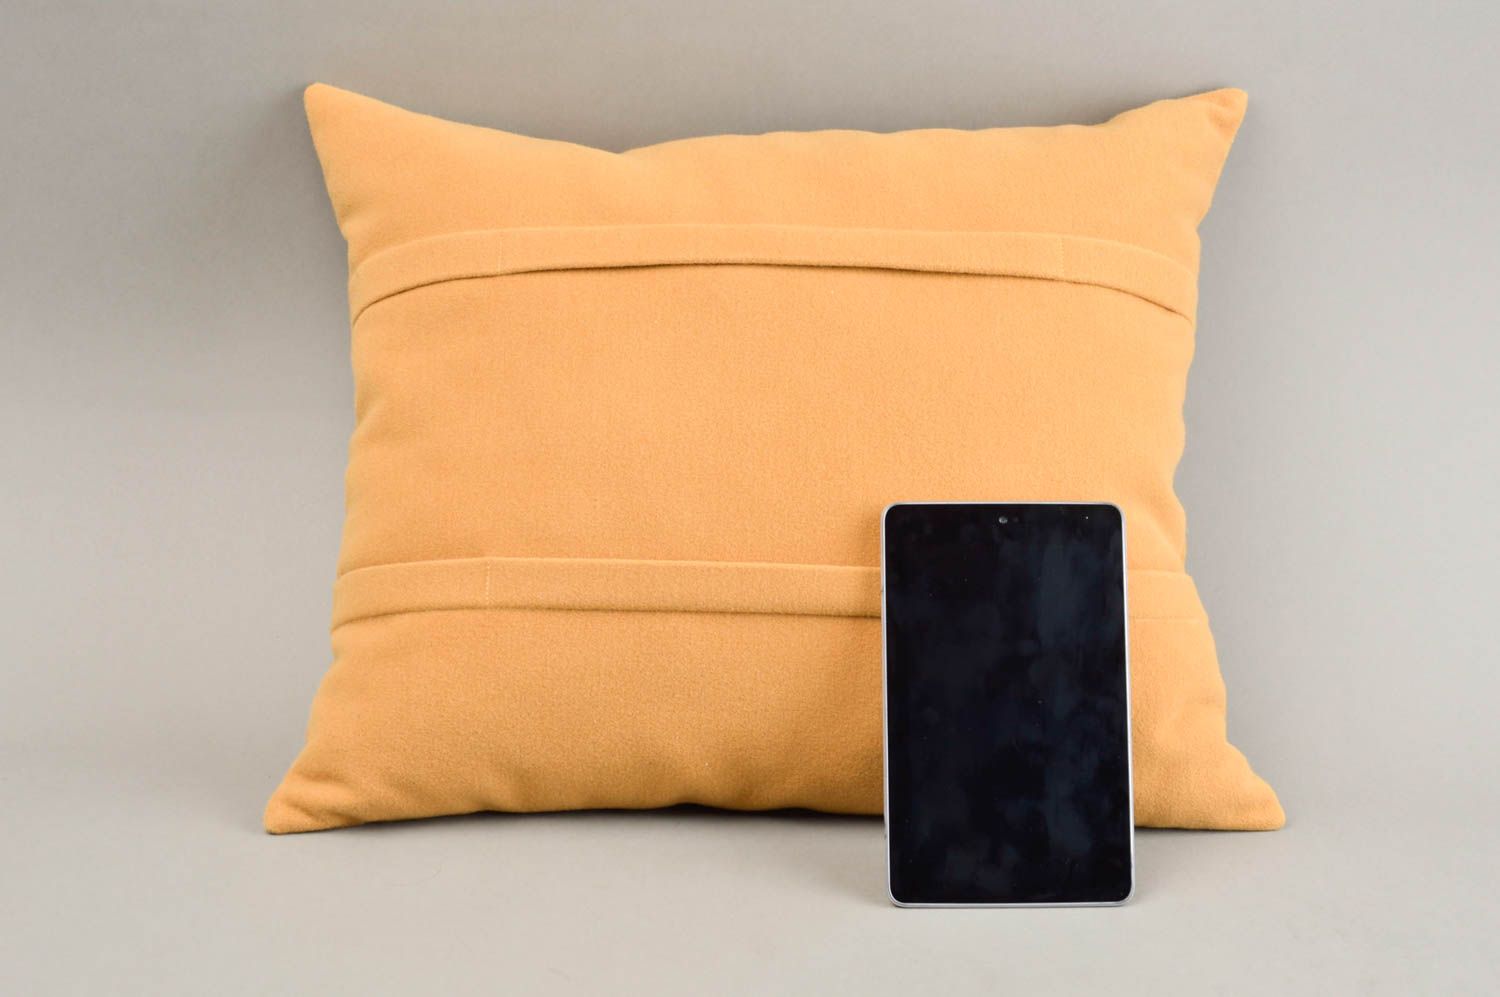 Handmade stand for pad stand for gadget decorative pillow handmade cushion photo 2